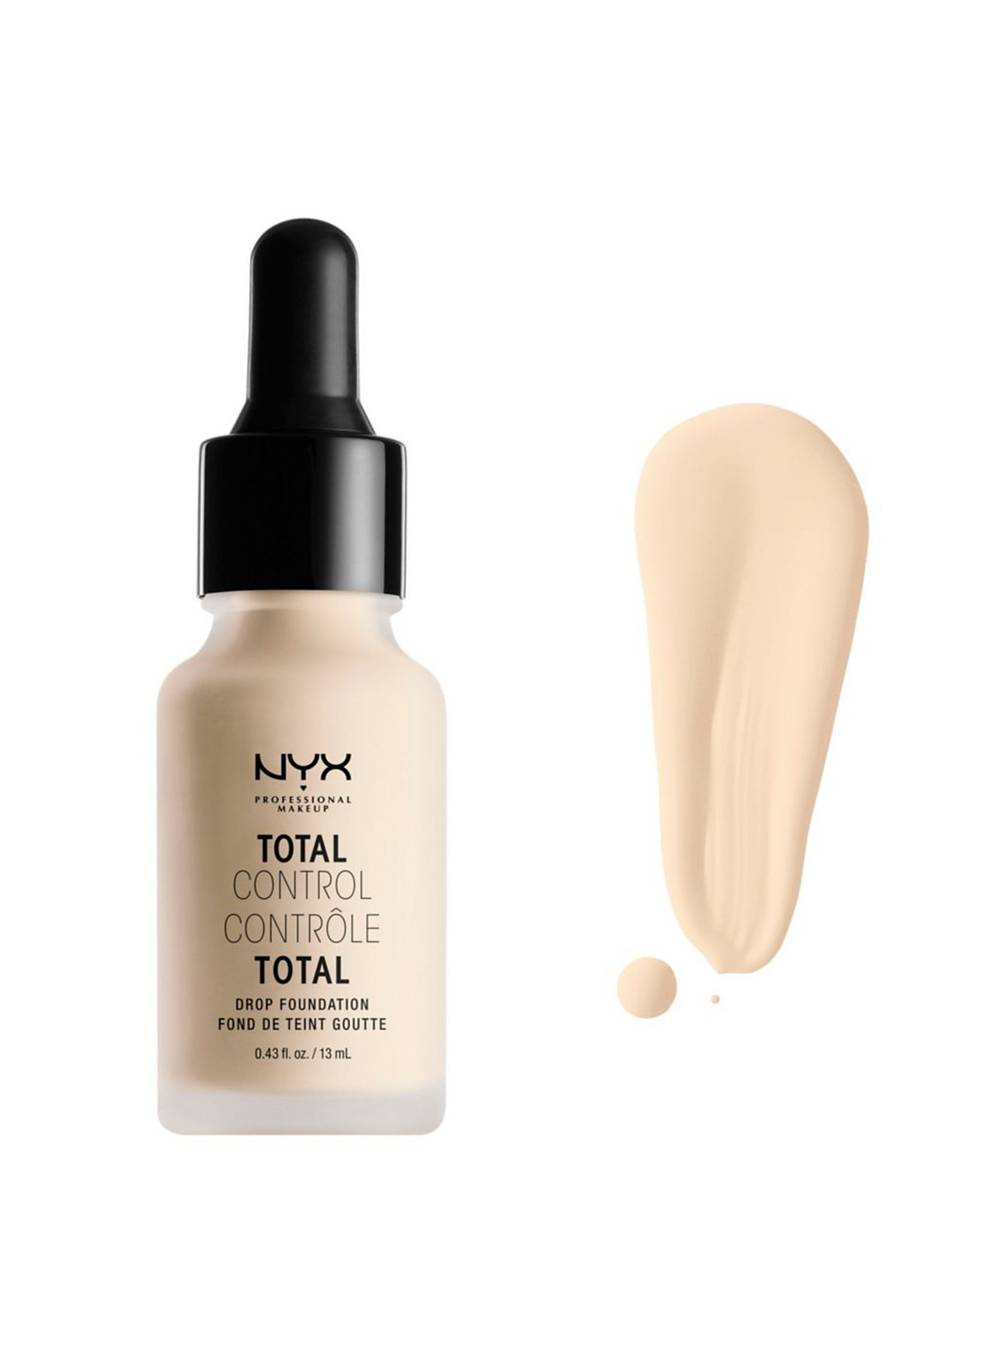 Nyx professional makeup base maquillaje total control pale (13 ml)